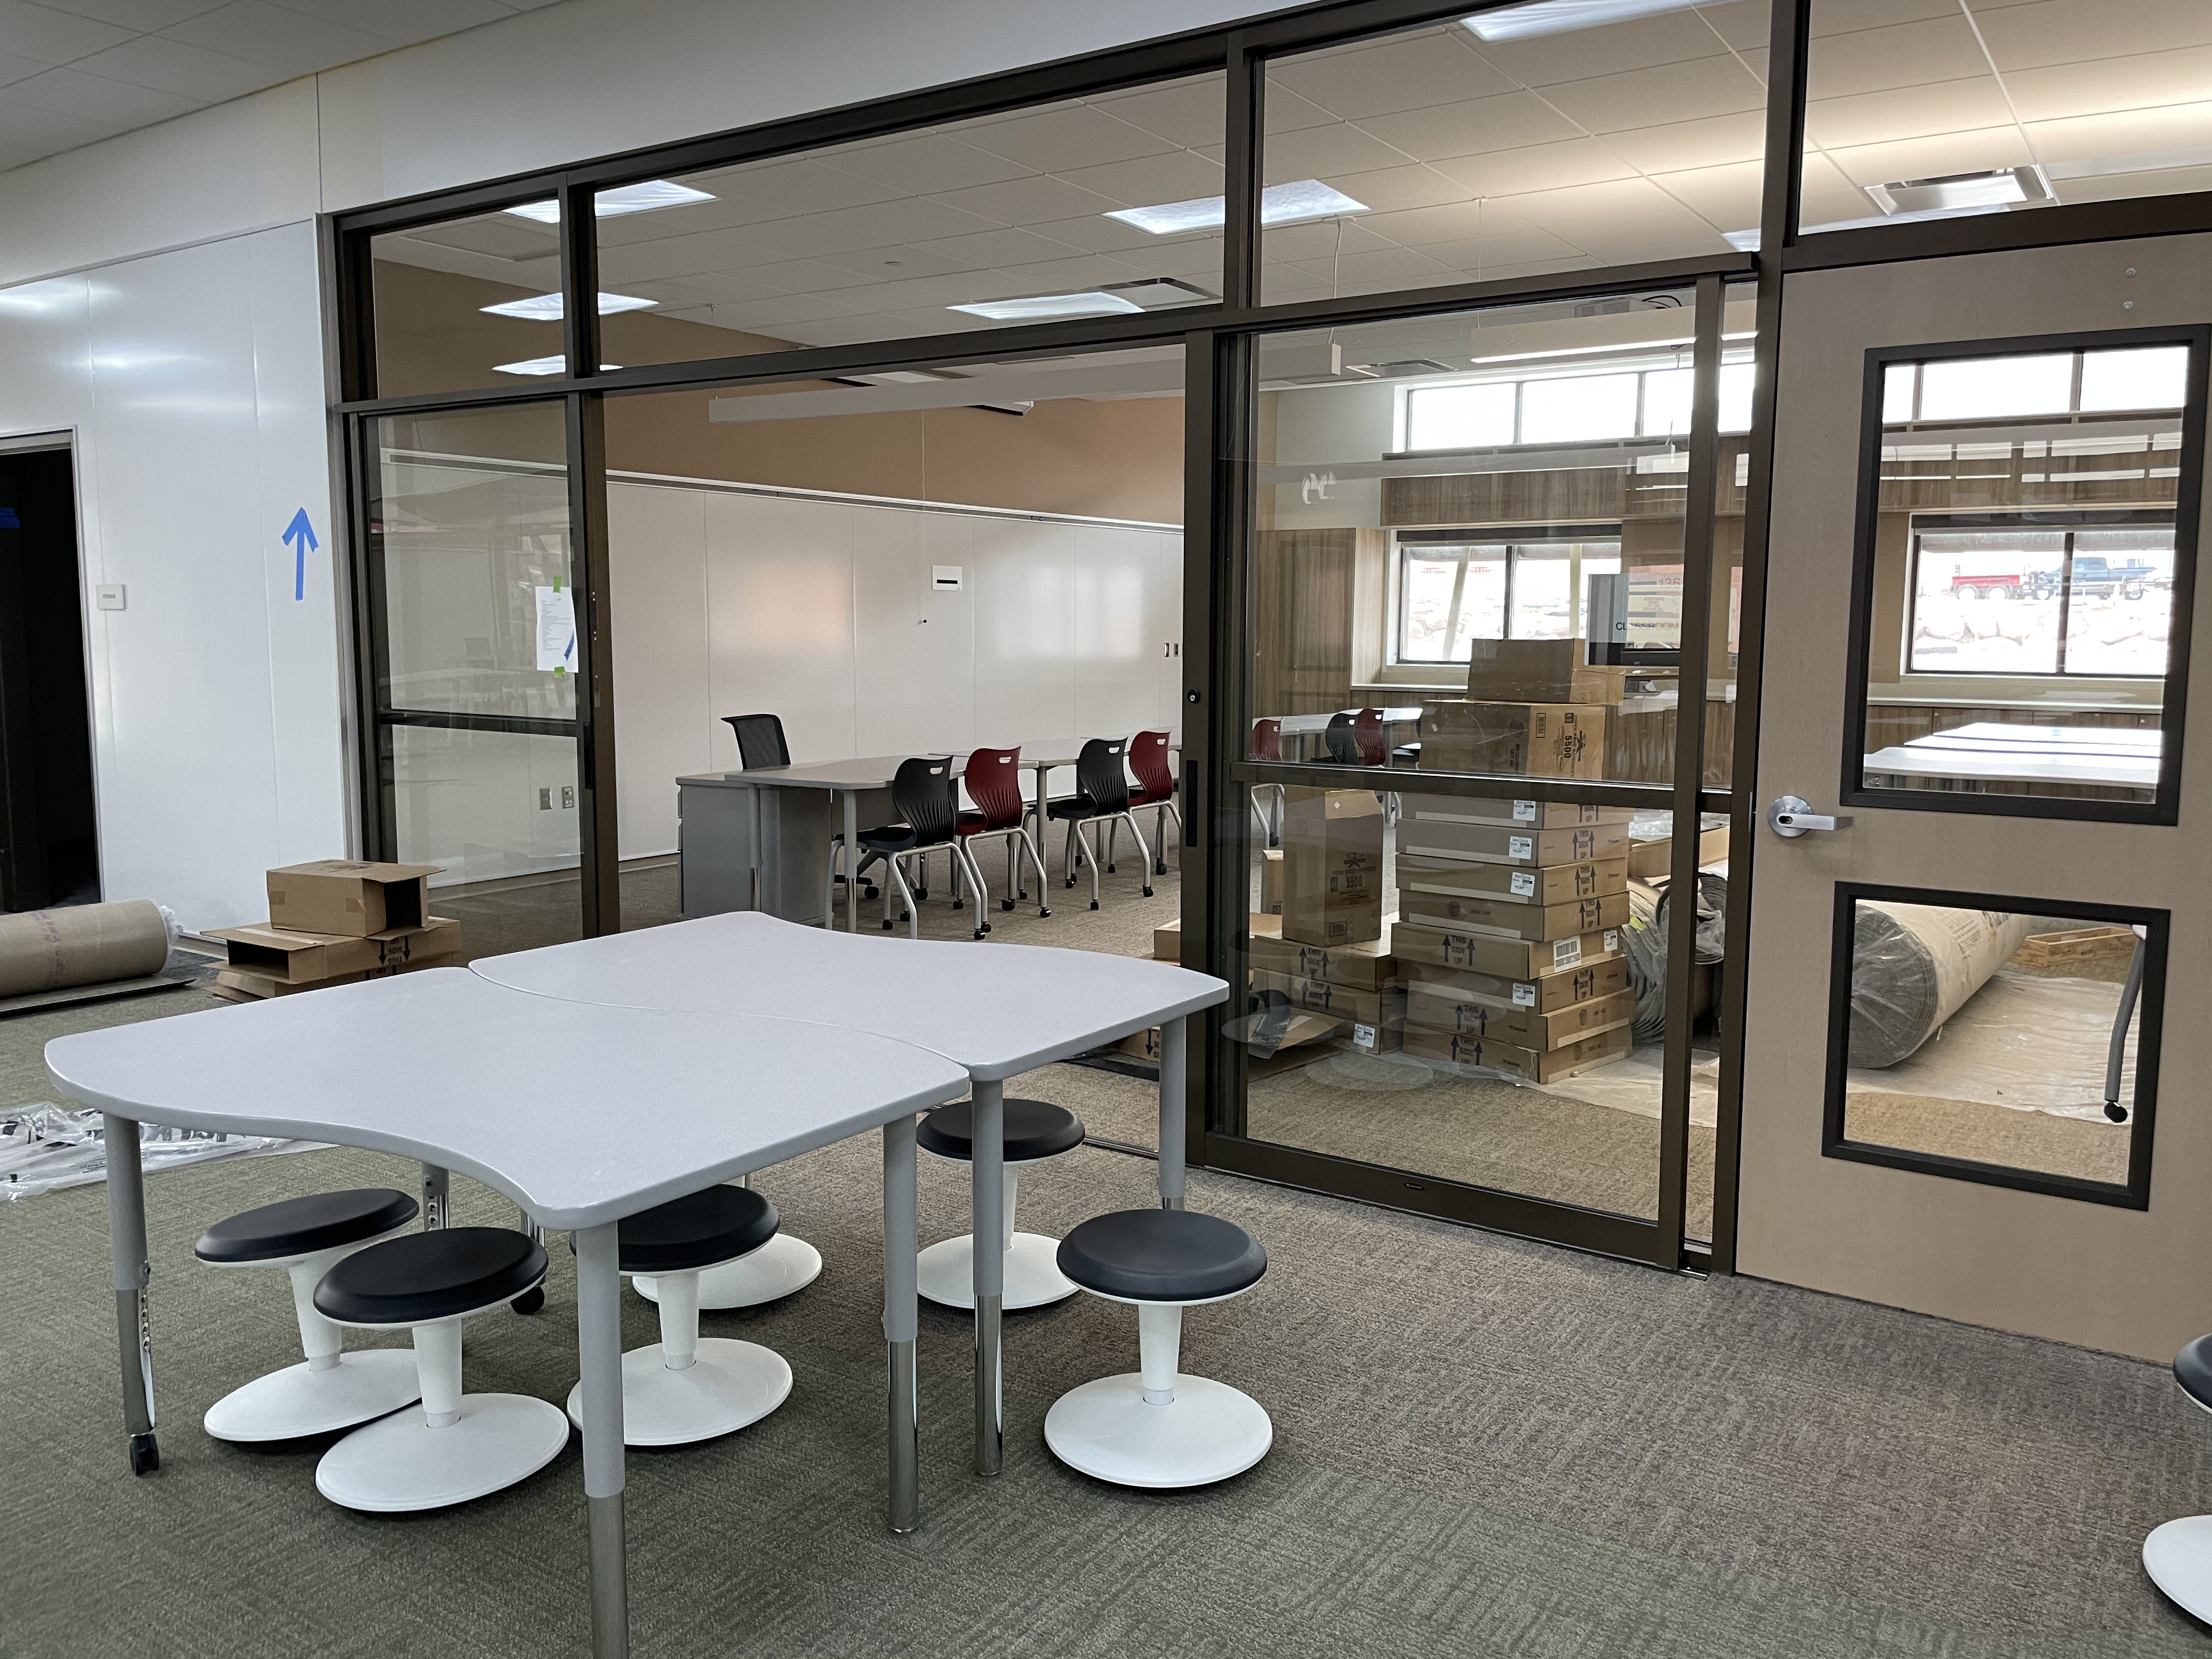 Classrooms inside the Hop are connected to the hallway by sliding glass doors and walls, allowing for teachers to create breakout groups separate from but tethered to the main classroom. 